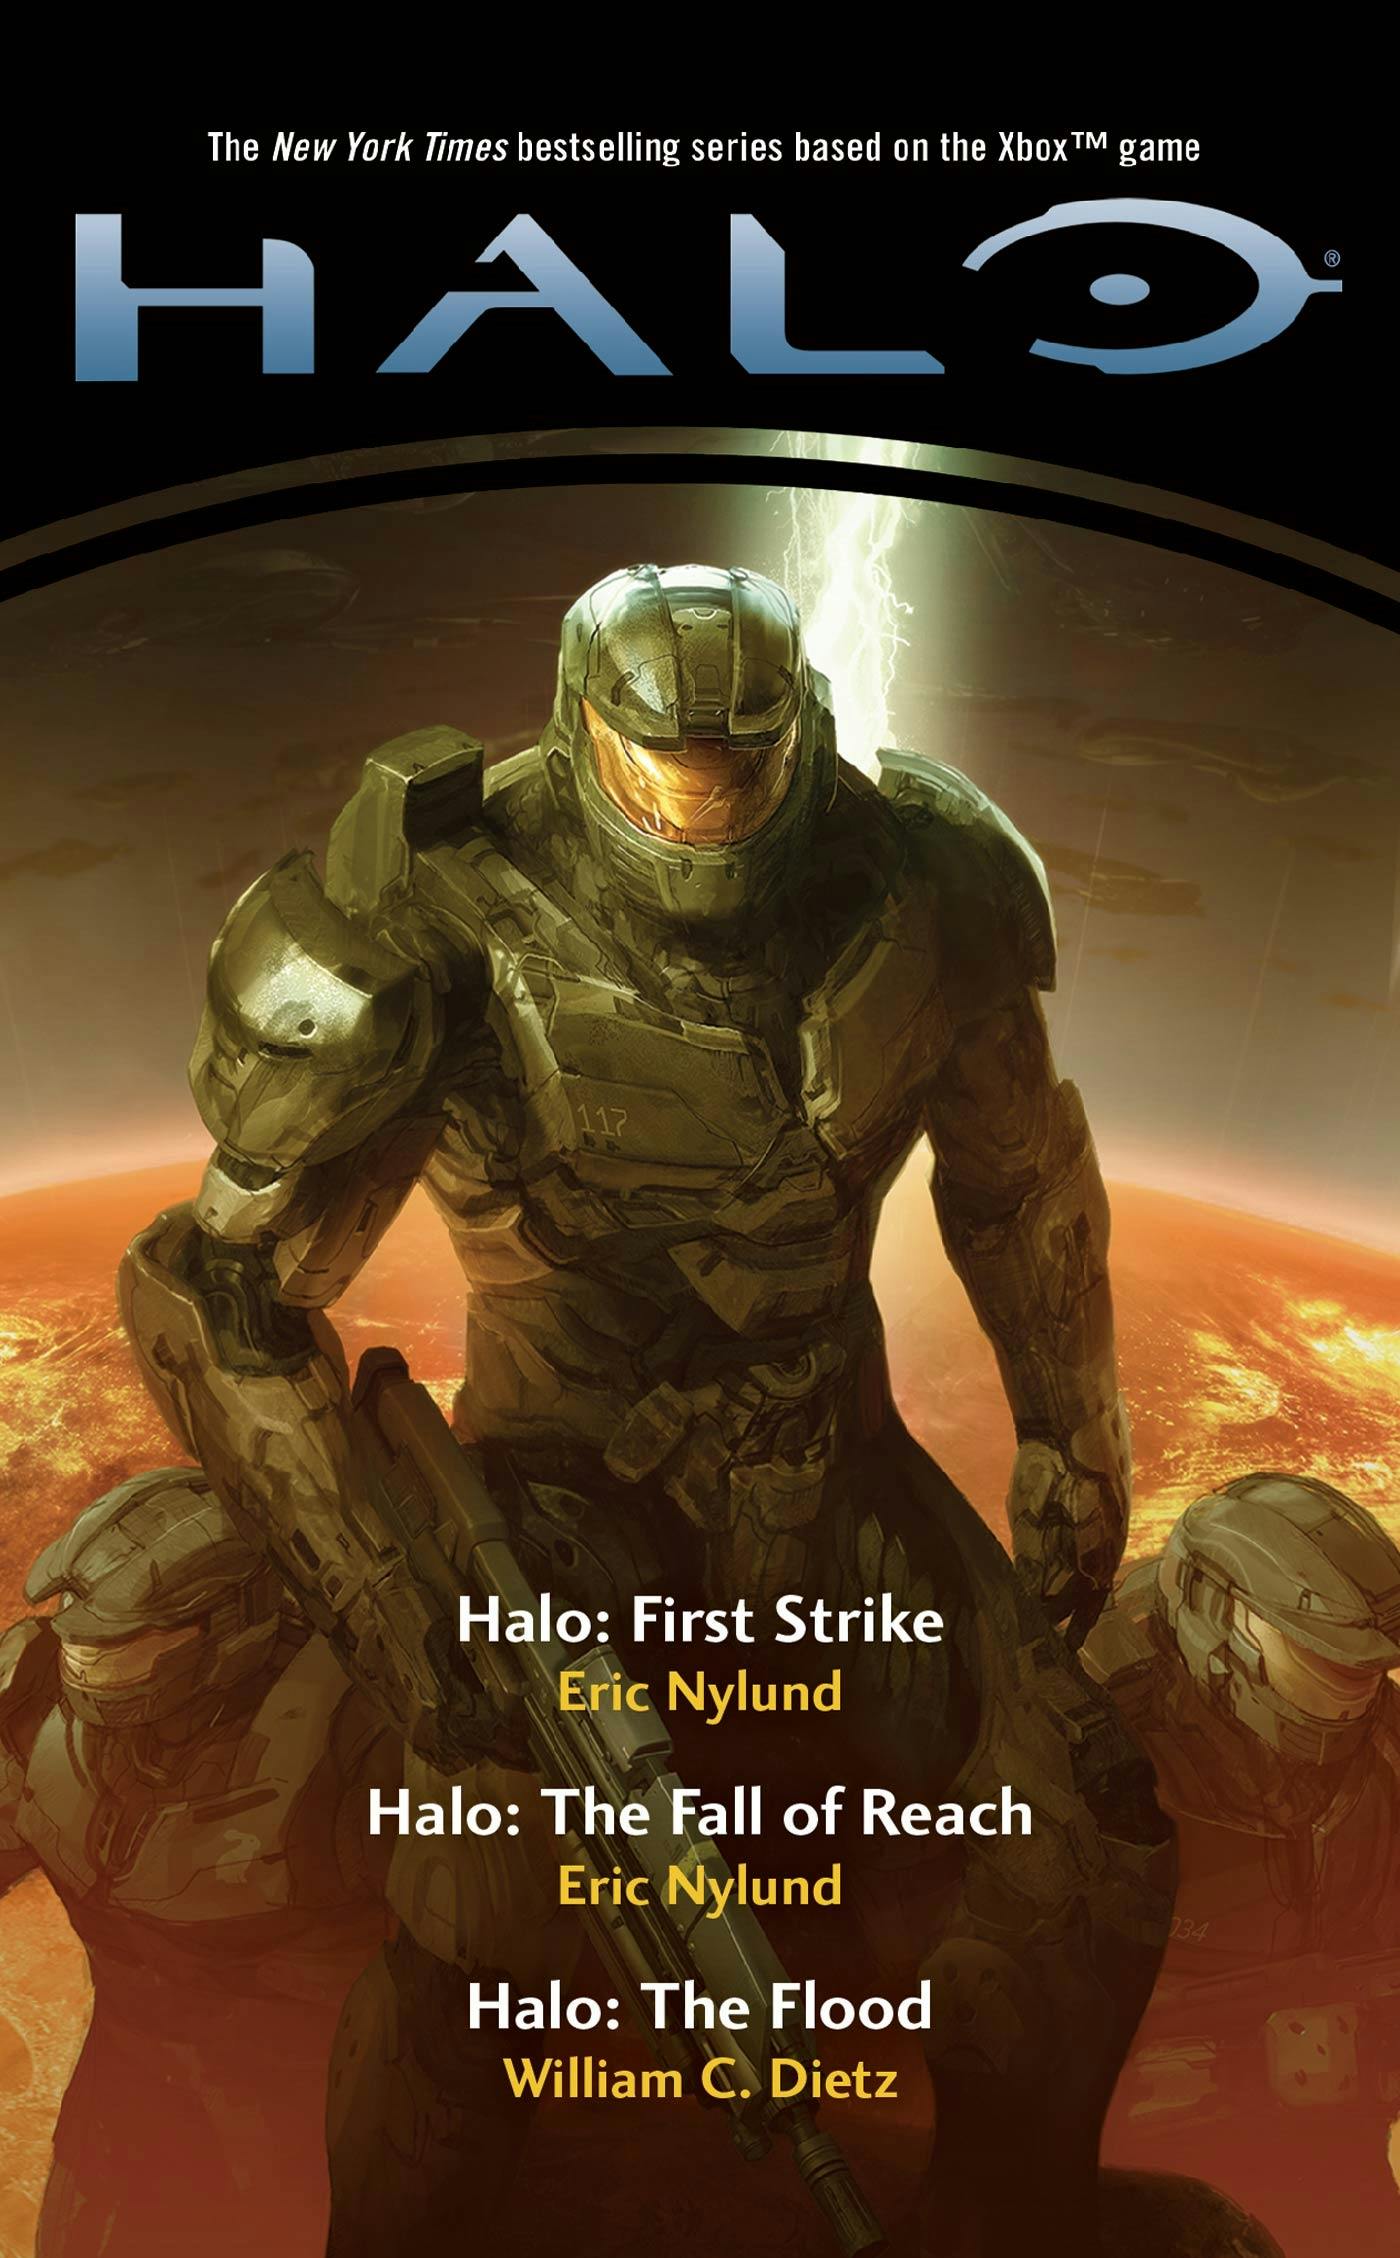 Cover for the book titled as: Halo Boxed Set II